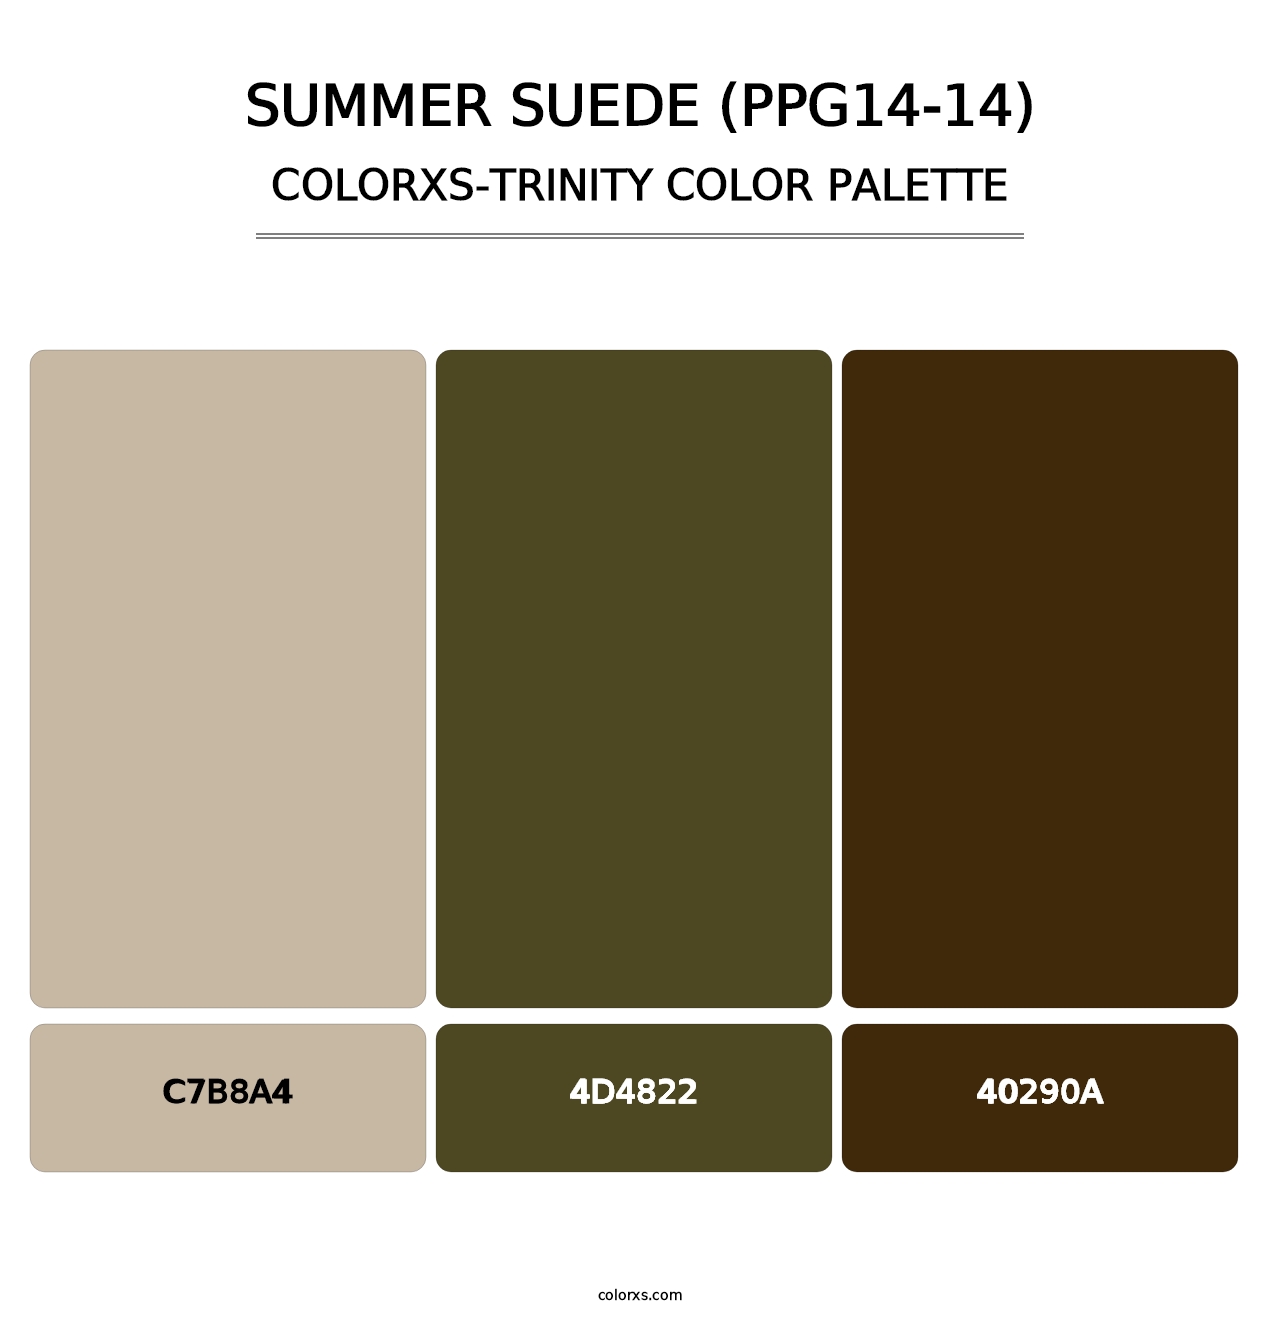 Summer Suede (PPG14-14) - Colorxs Trinity Palette